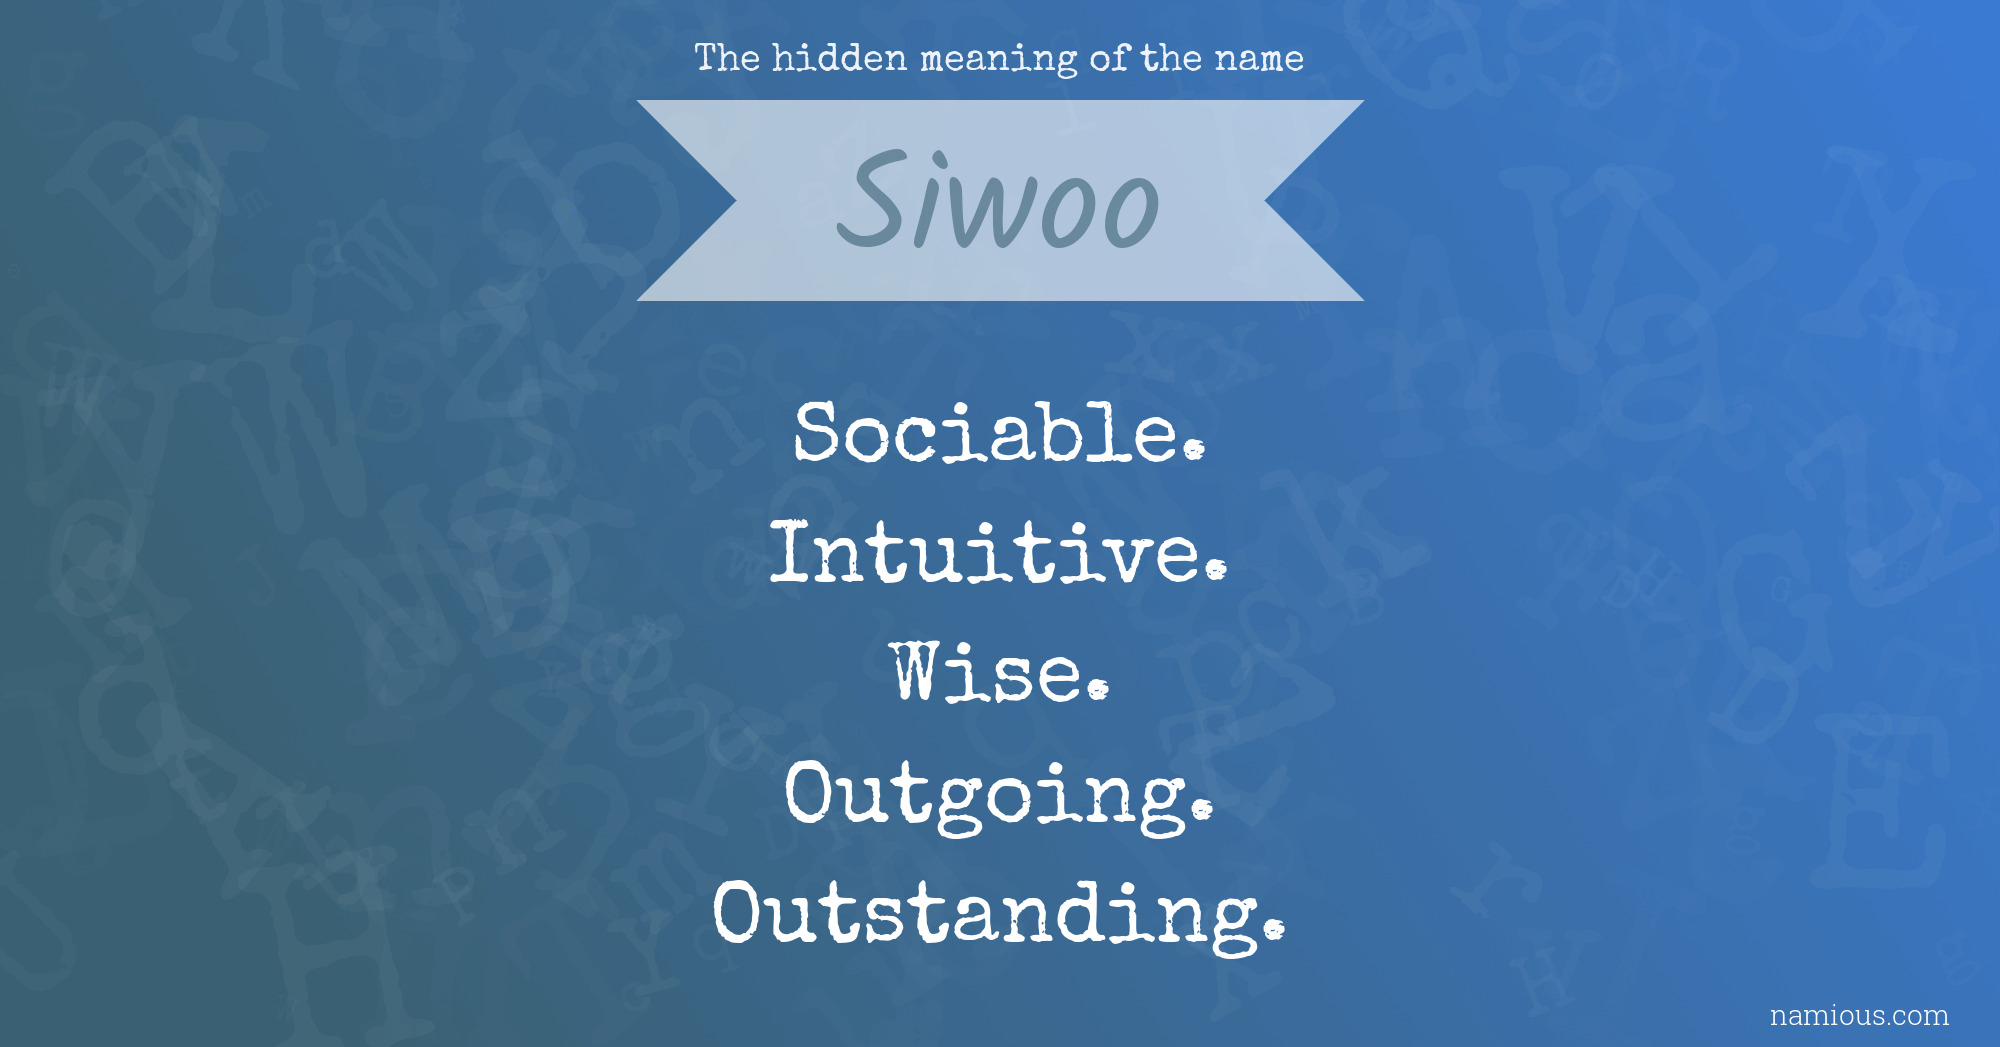 The hidden meaning of the name Siwoo